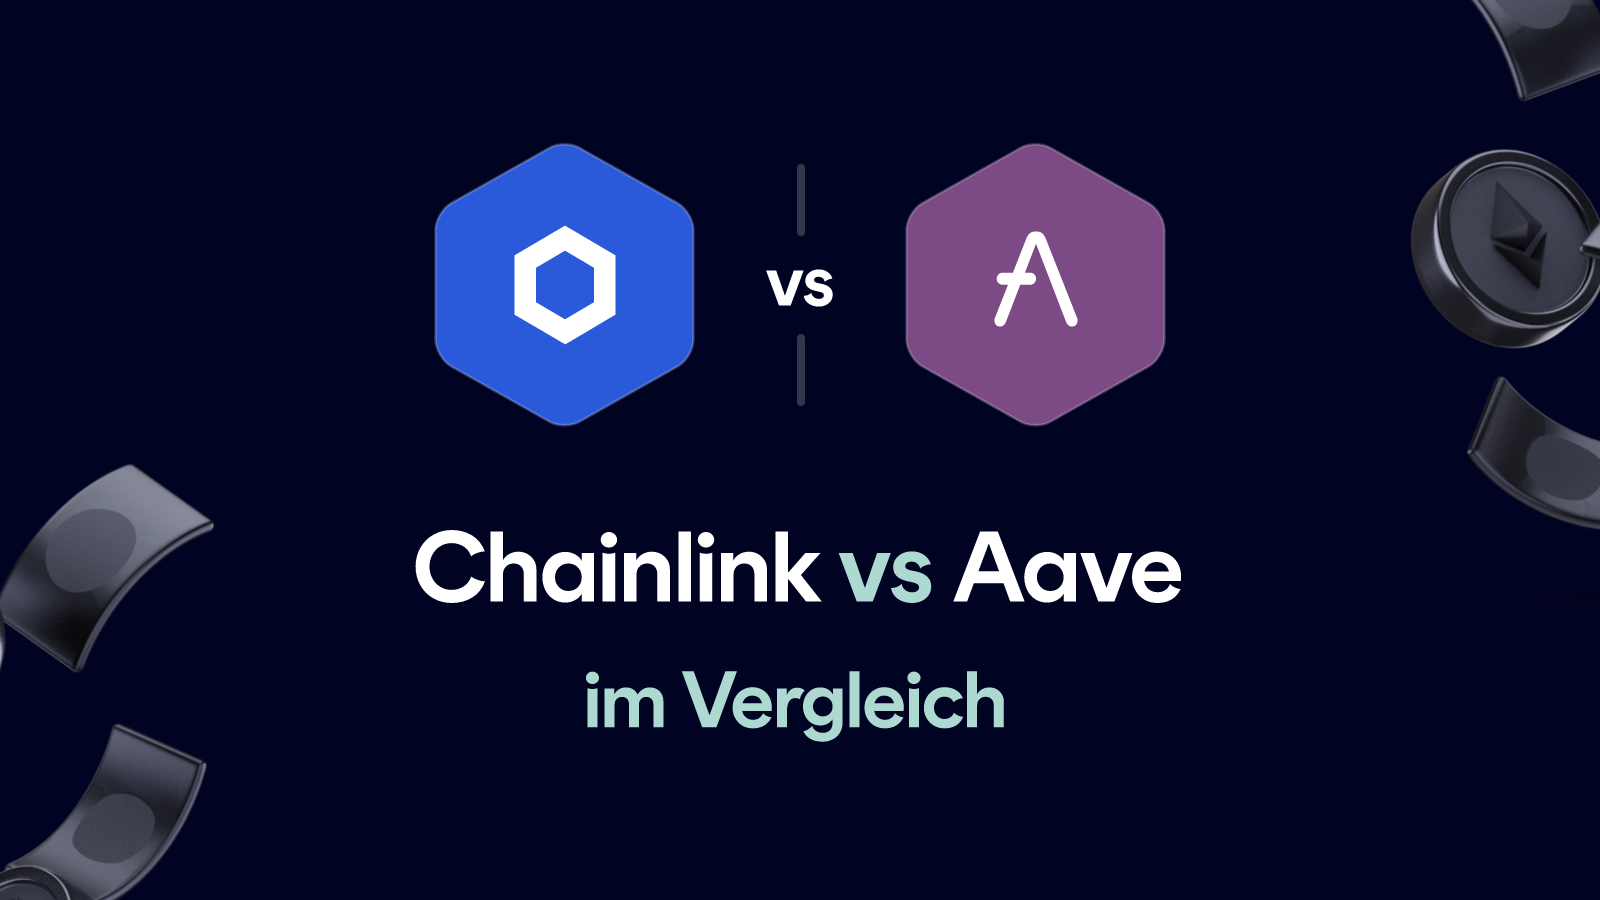 Chainlink vs Aave